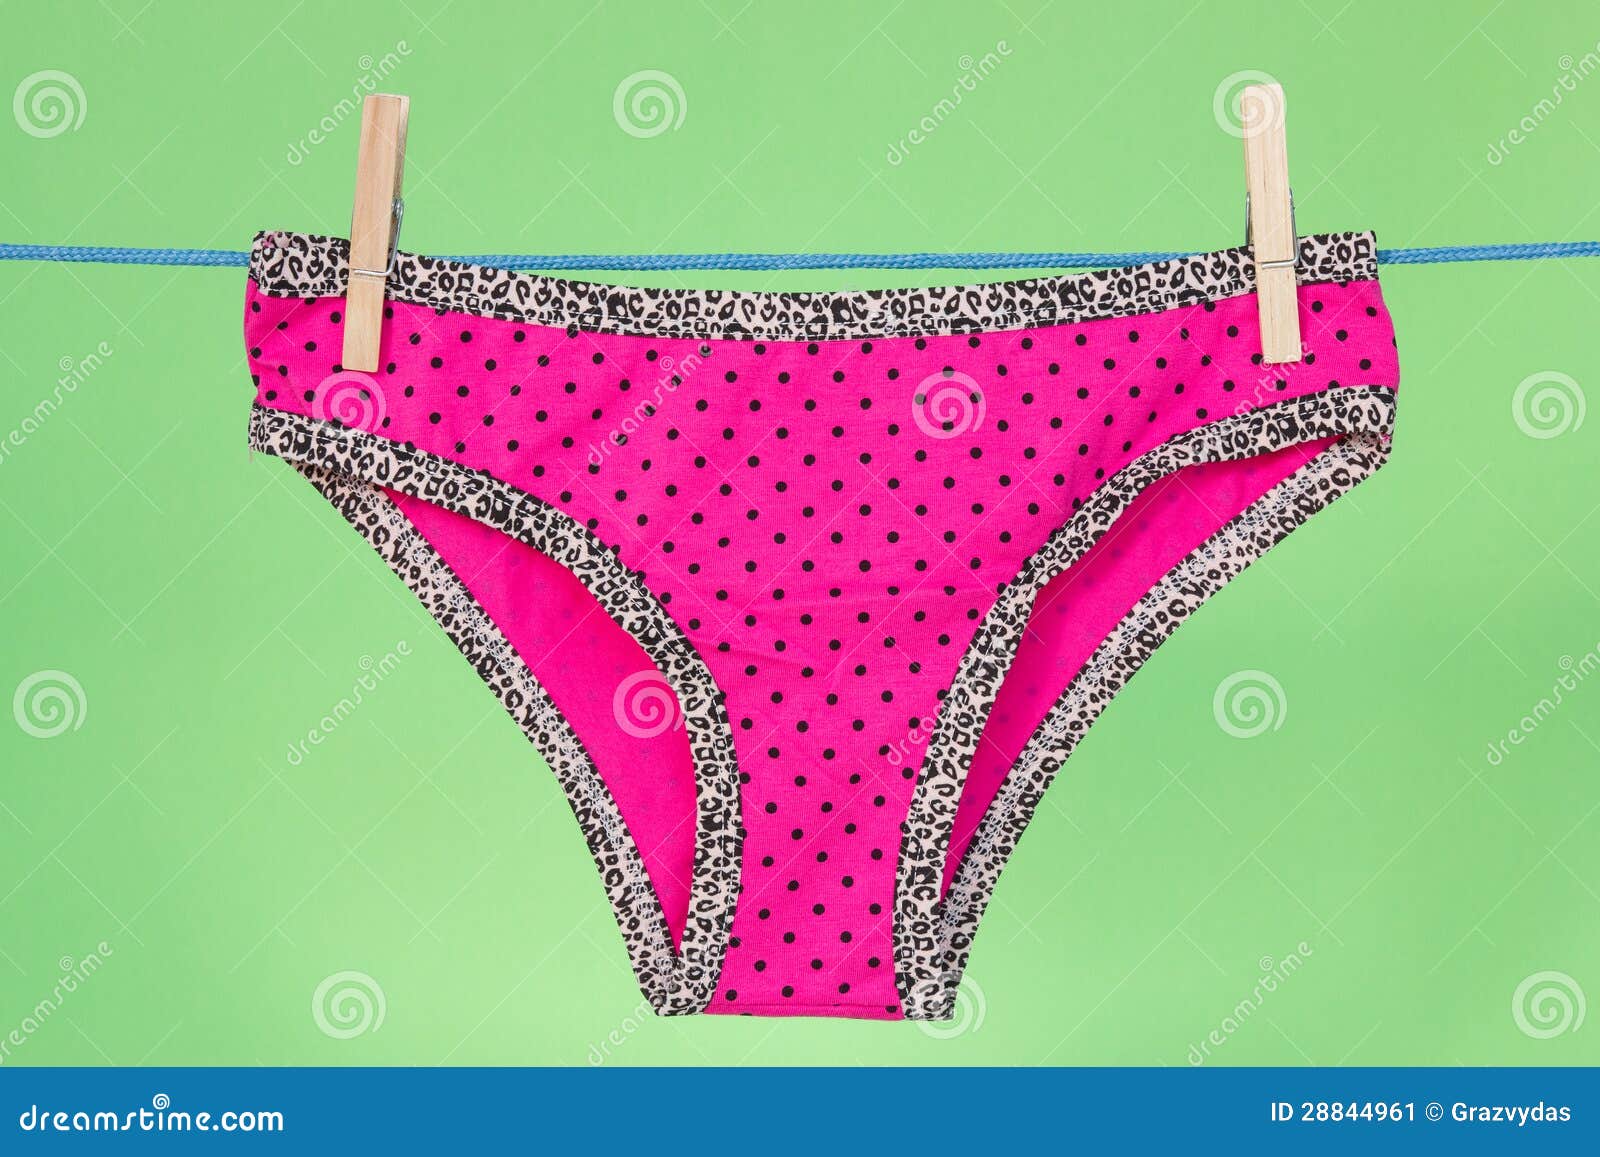 Pink Panties On The Green Background Stock Image Image 28844961